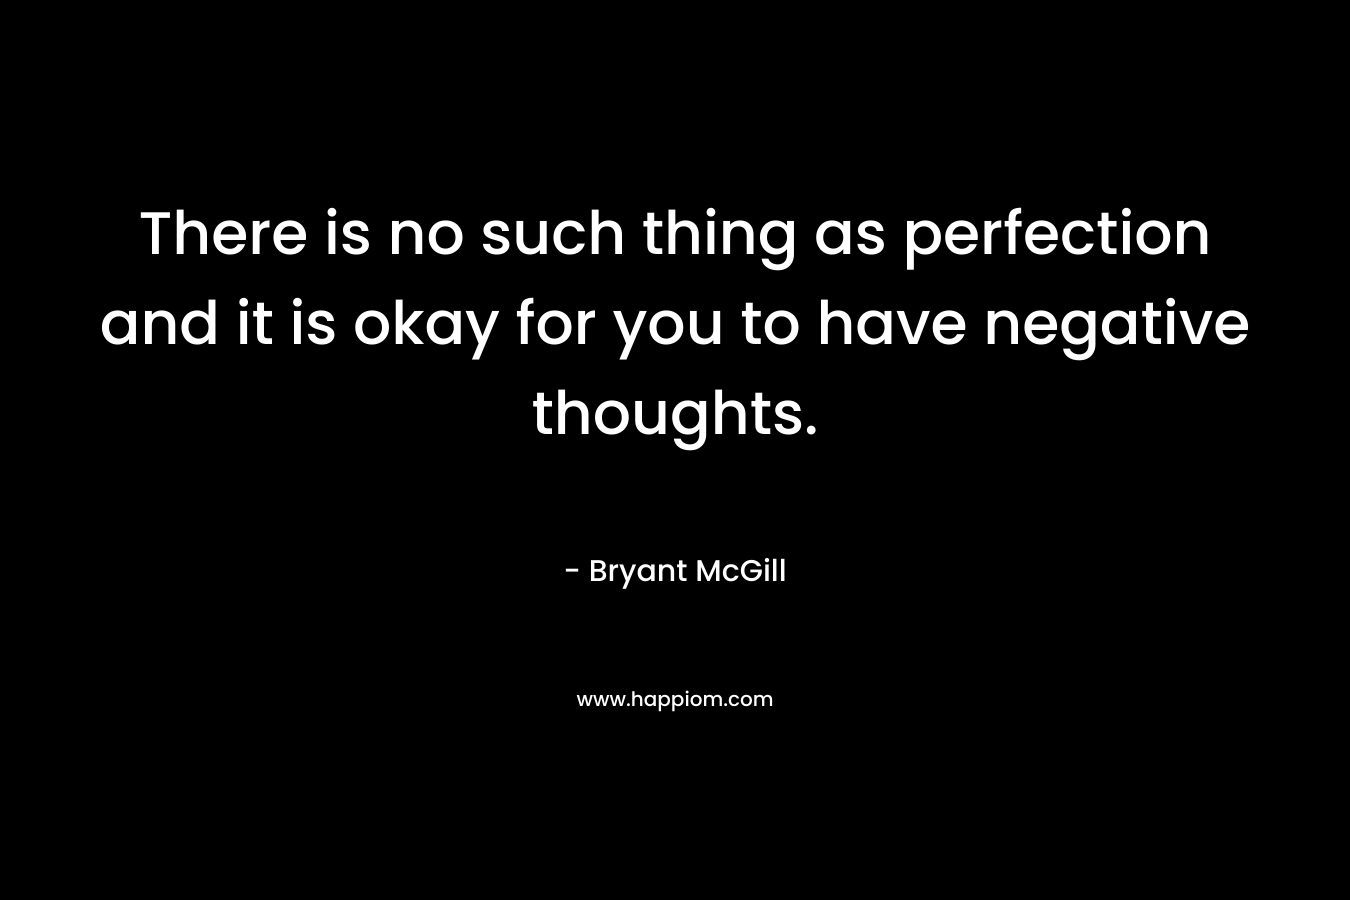 There is no such thing as perfection and it is okay for you to have negative thoughts.